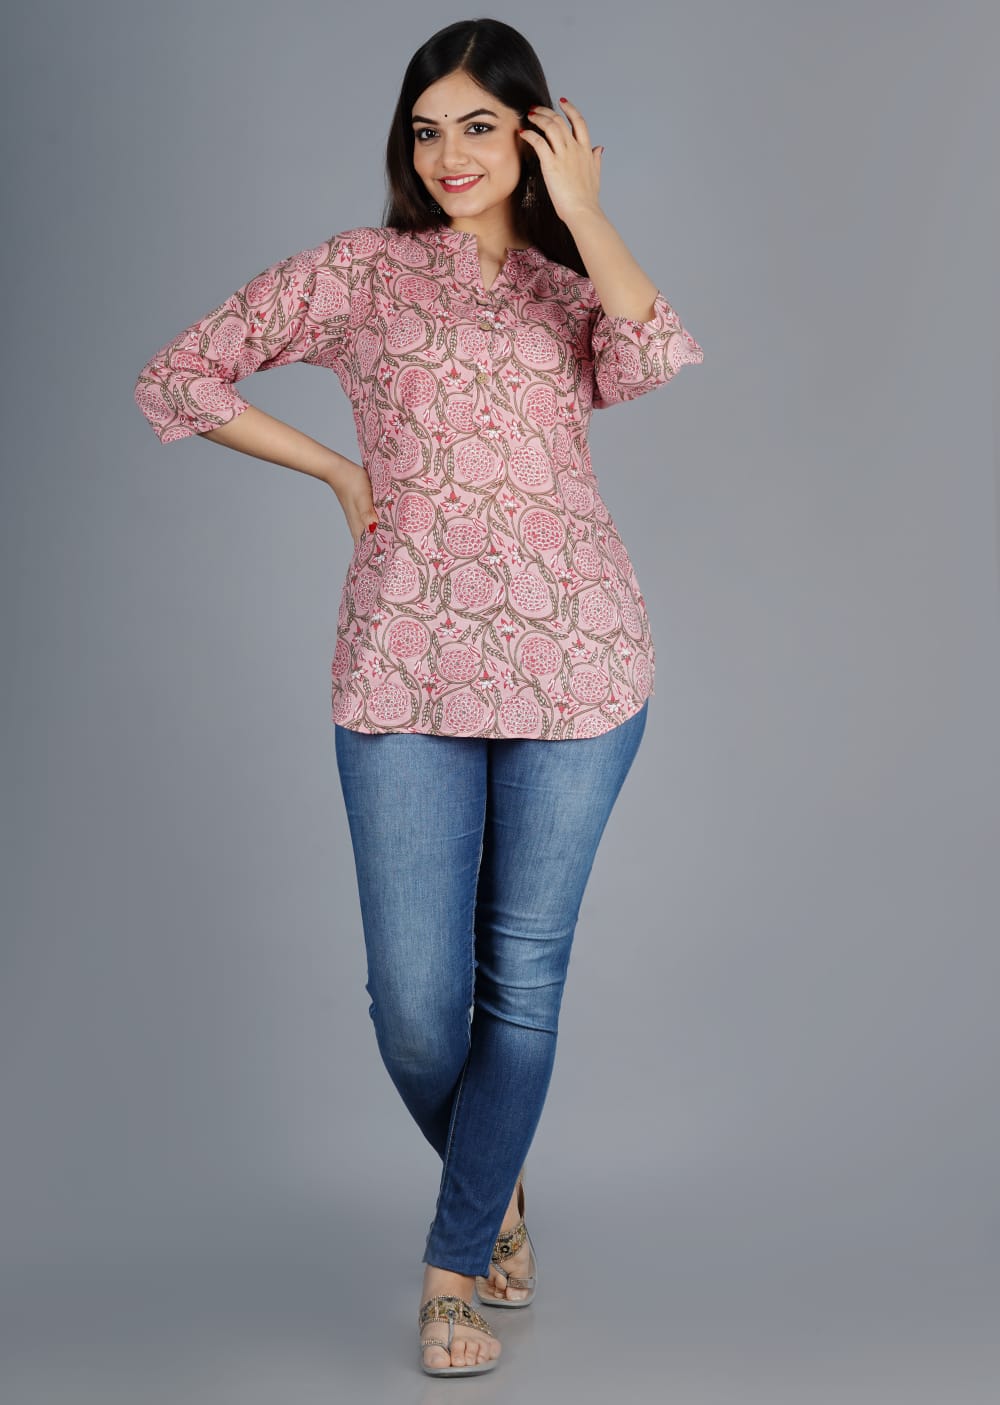 Add a Pop of Color to Your Wardrobe with Pink Jal Printed Cotton Tops